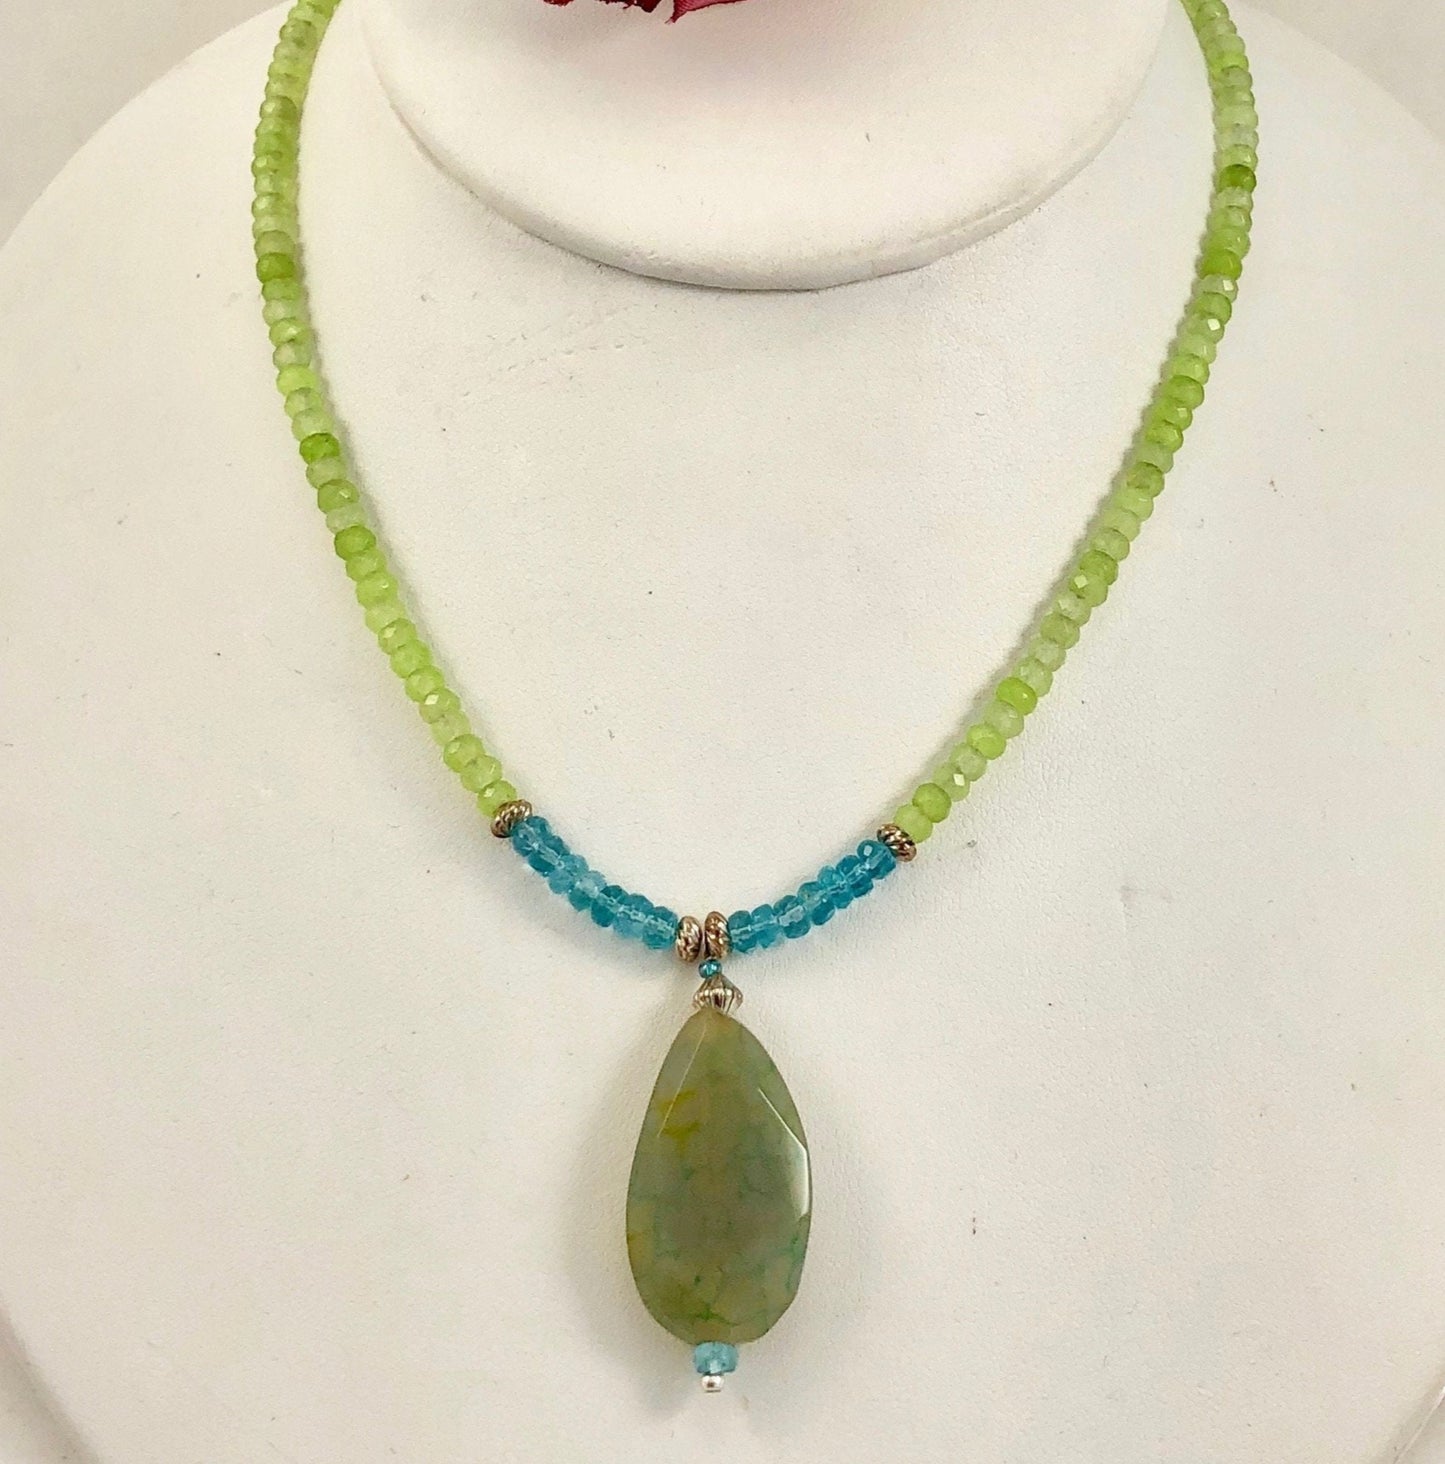 Stunning peridot beaded necklace accented with blue quartz beads and an agate drop.